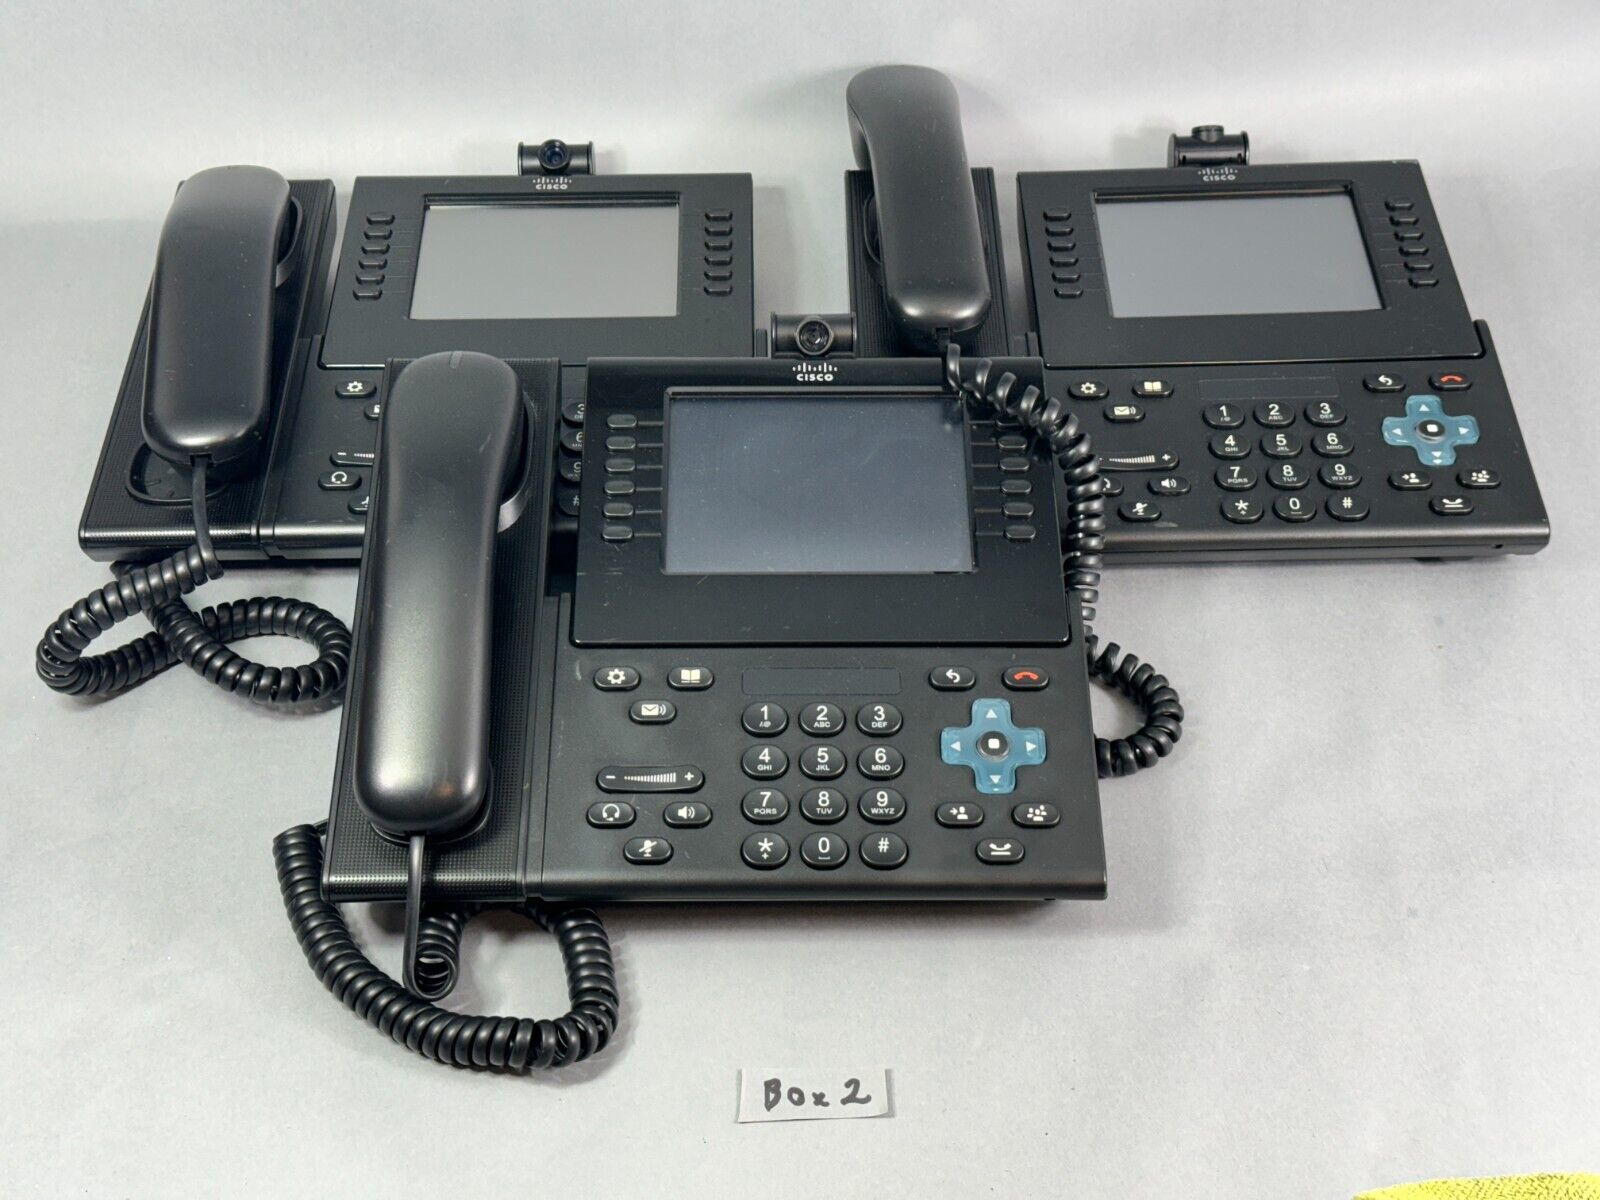 3x Cisco CP-9971 VoIP Color Touchscreen Phones w/ Camera - No Cable, Units Only